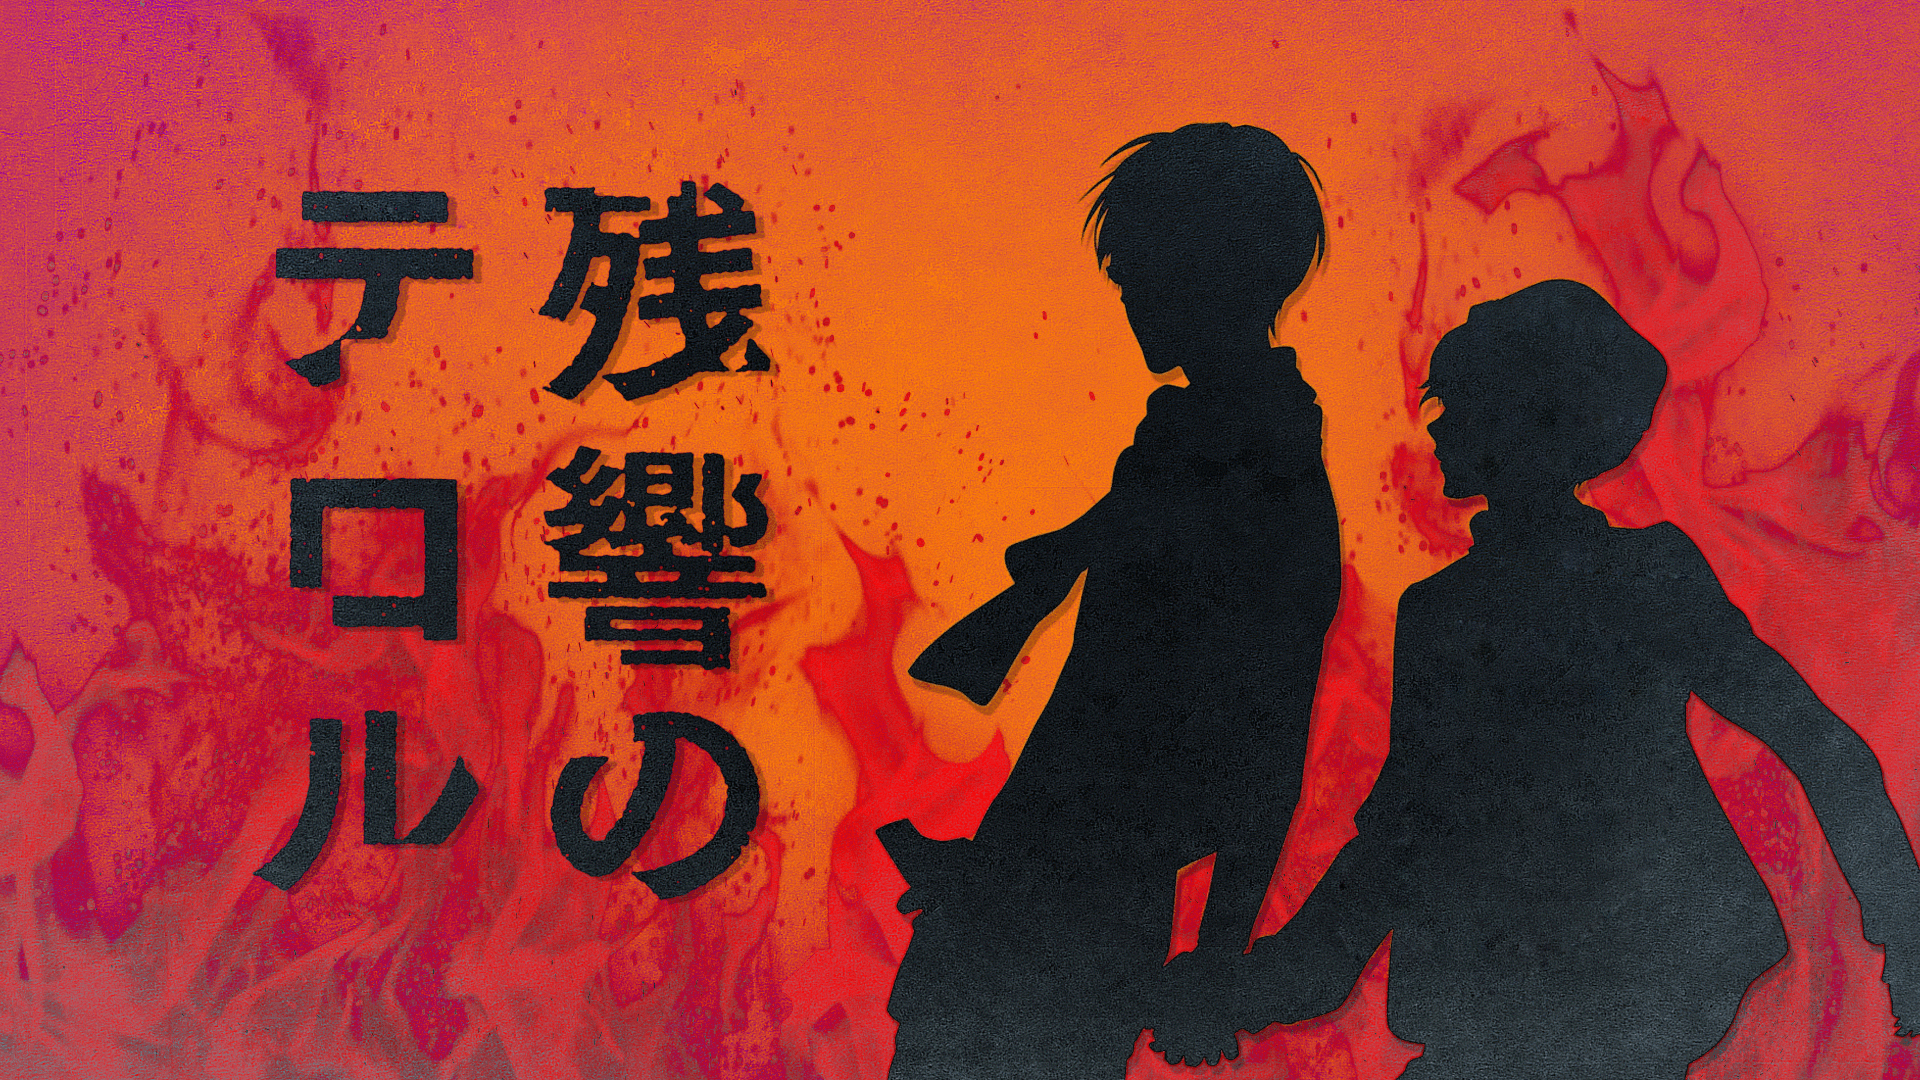 Zankyou No Terror Wallpaper Number 9 and Number 12